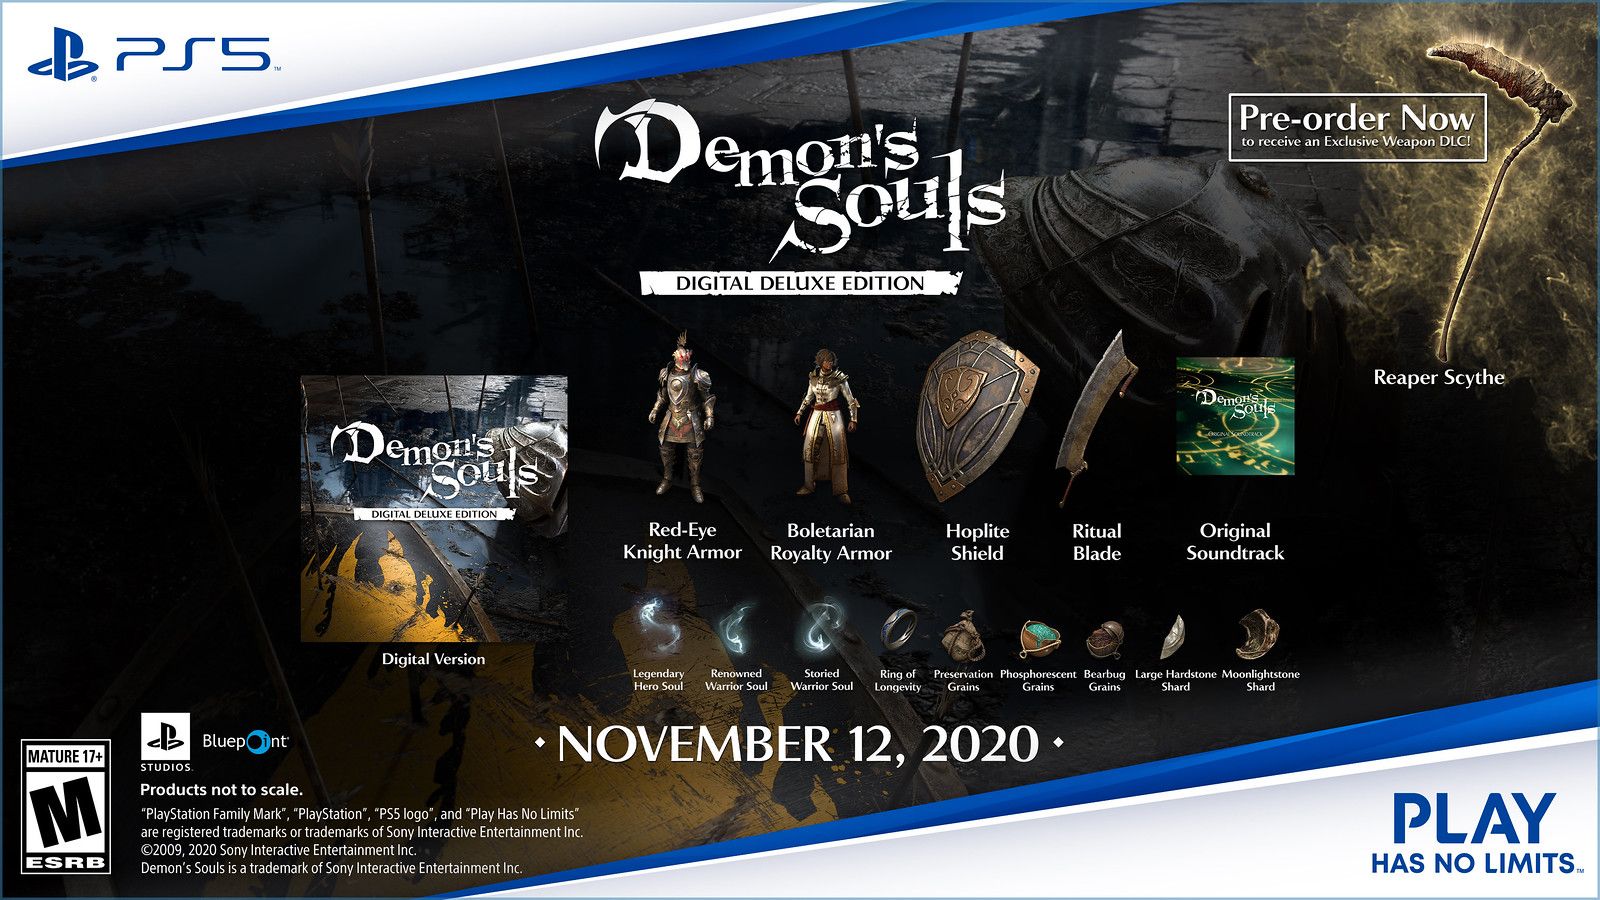 Demon's Souls Digital Deluxe Edition DLC Included Armor Set